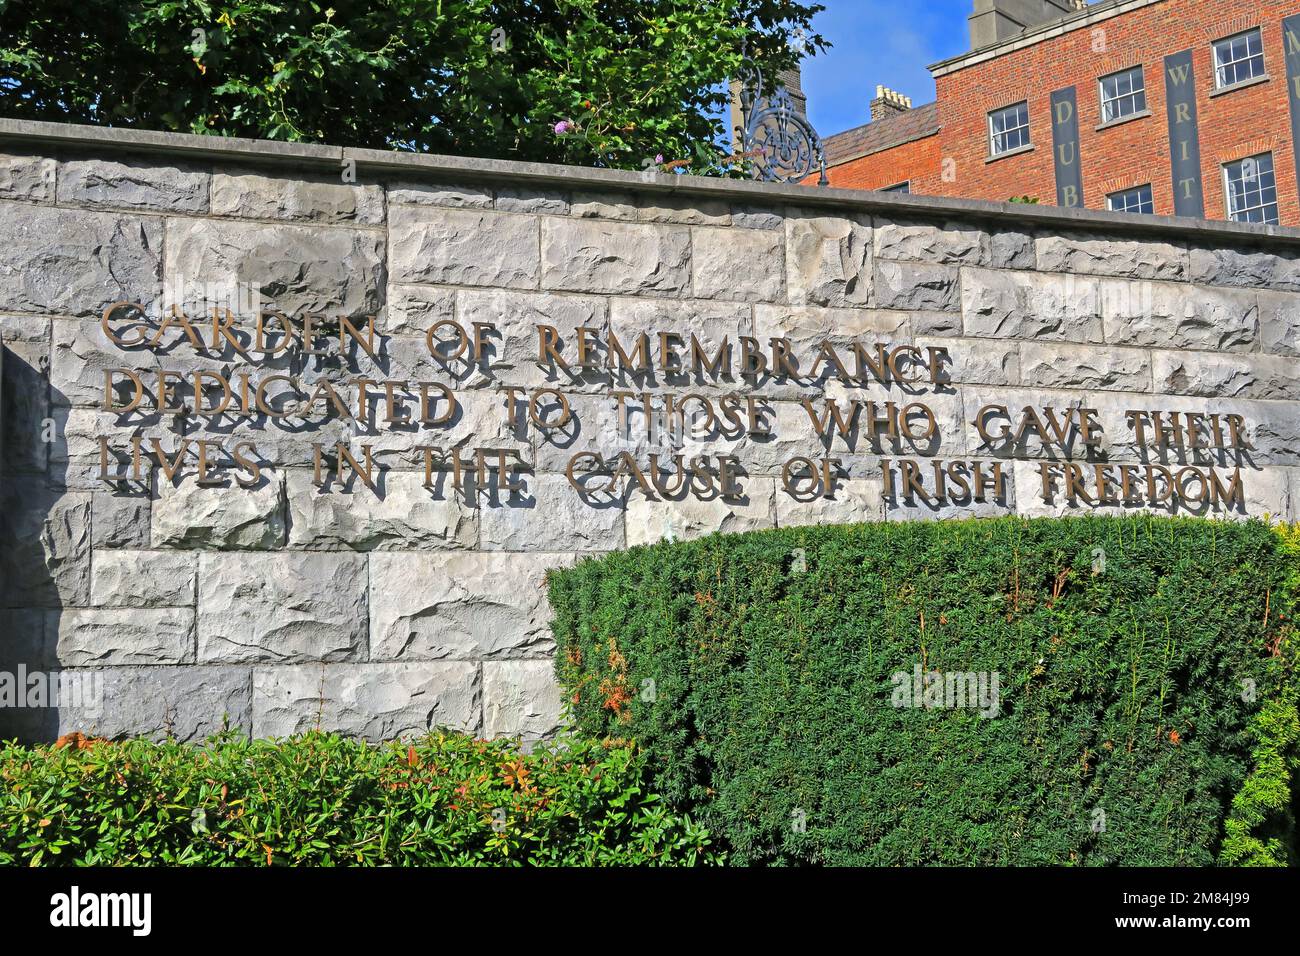 Garden of remembrance, dedicated to those, who gave their lives, in the cause of,Irish Freedom,Parnell Square N,Rotunda,Dublin, D01 T3V8,Eire,Ireland Stock Photo